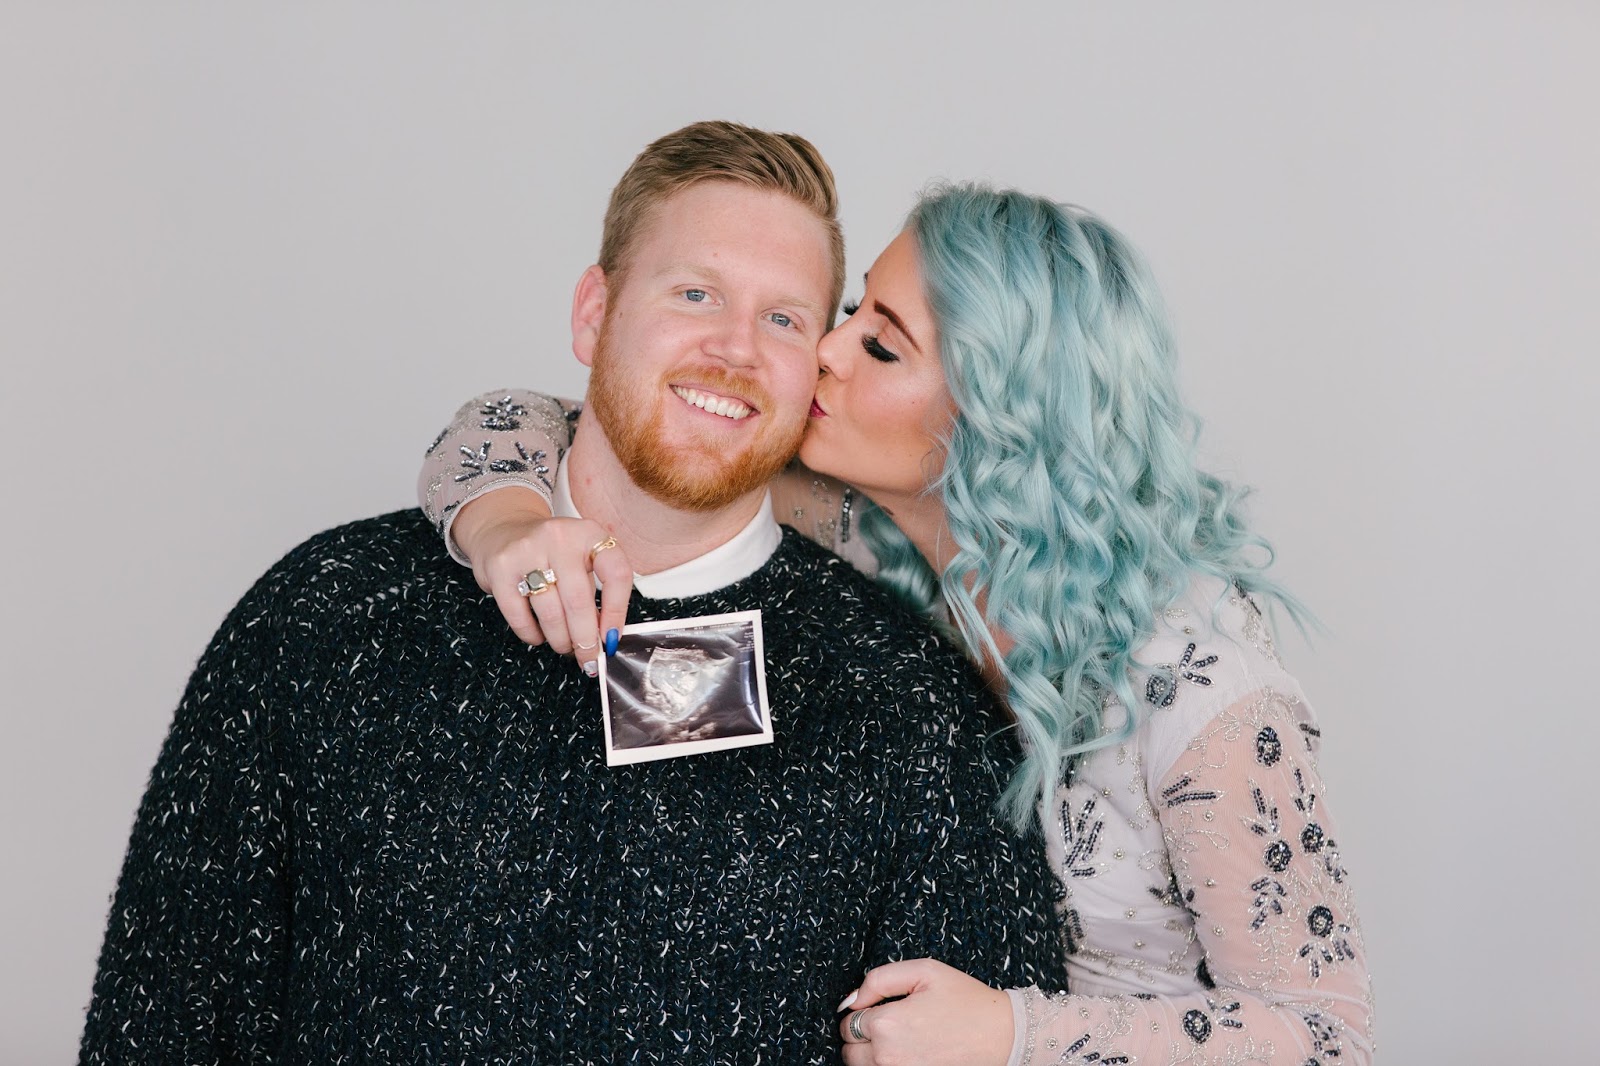 Ultrasound photo ideas, announcing being pregnant